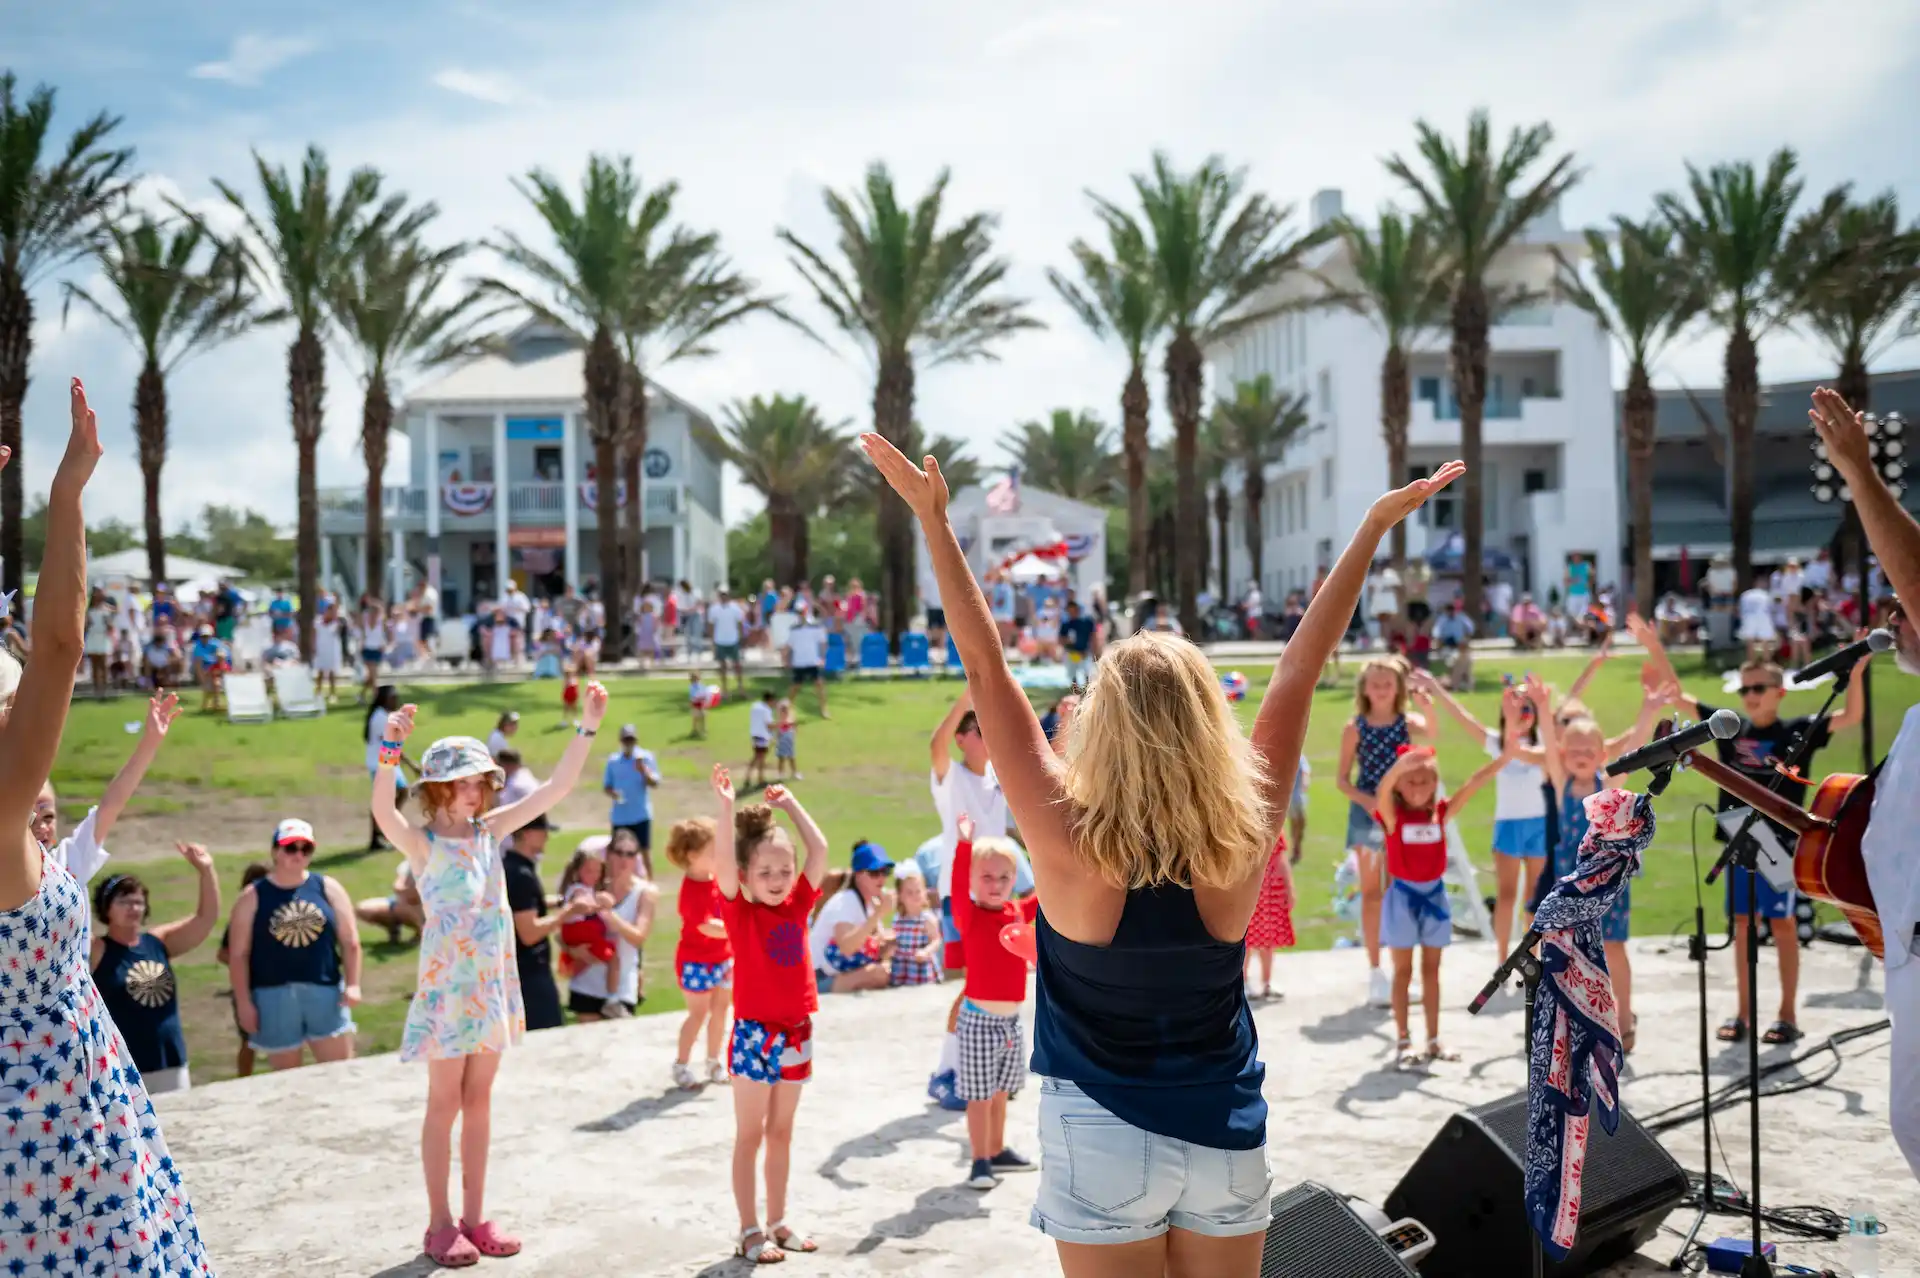 Huck & Lilly Kids Music Performance in Seaside, Florida